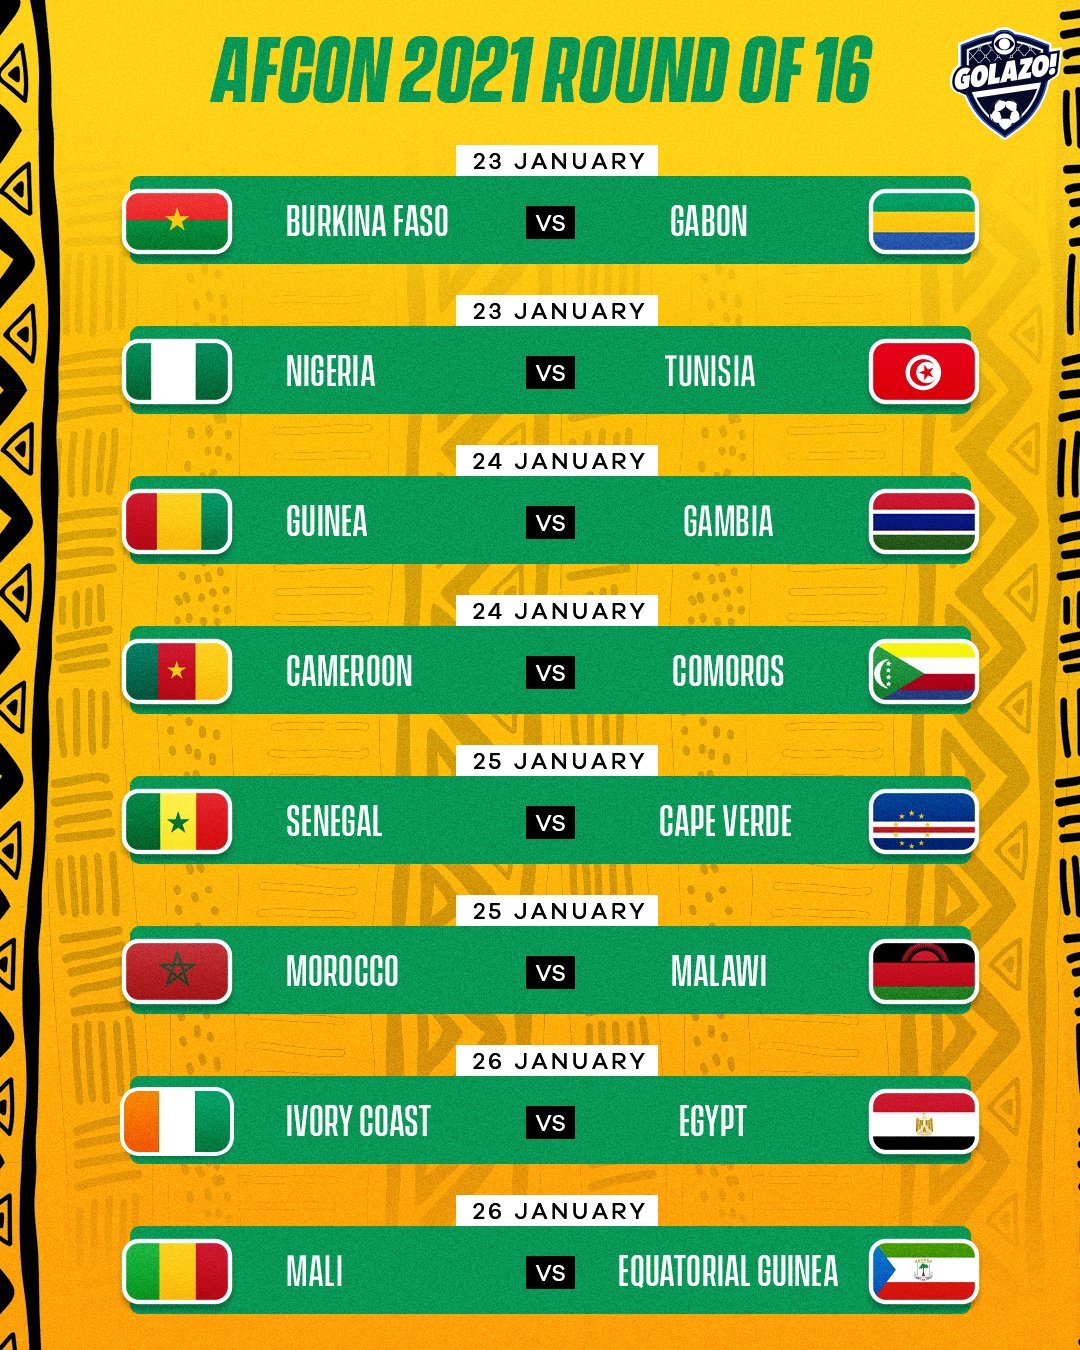 AFCON 2021: Round of 16 games